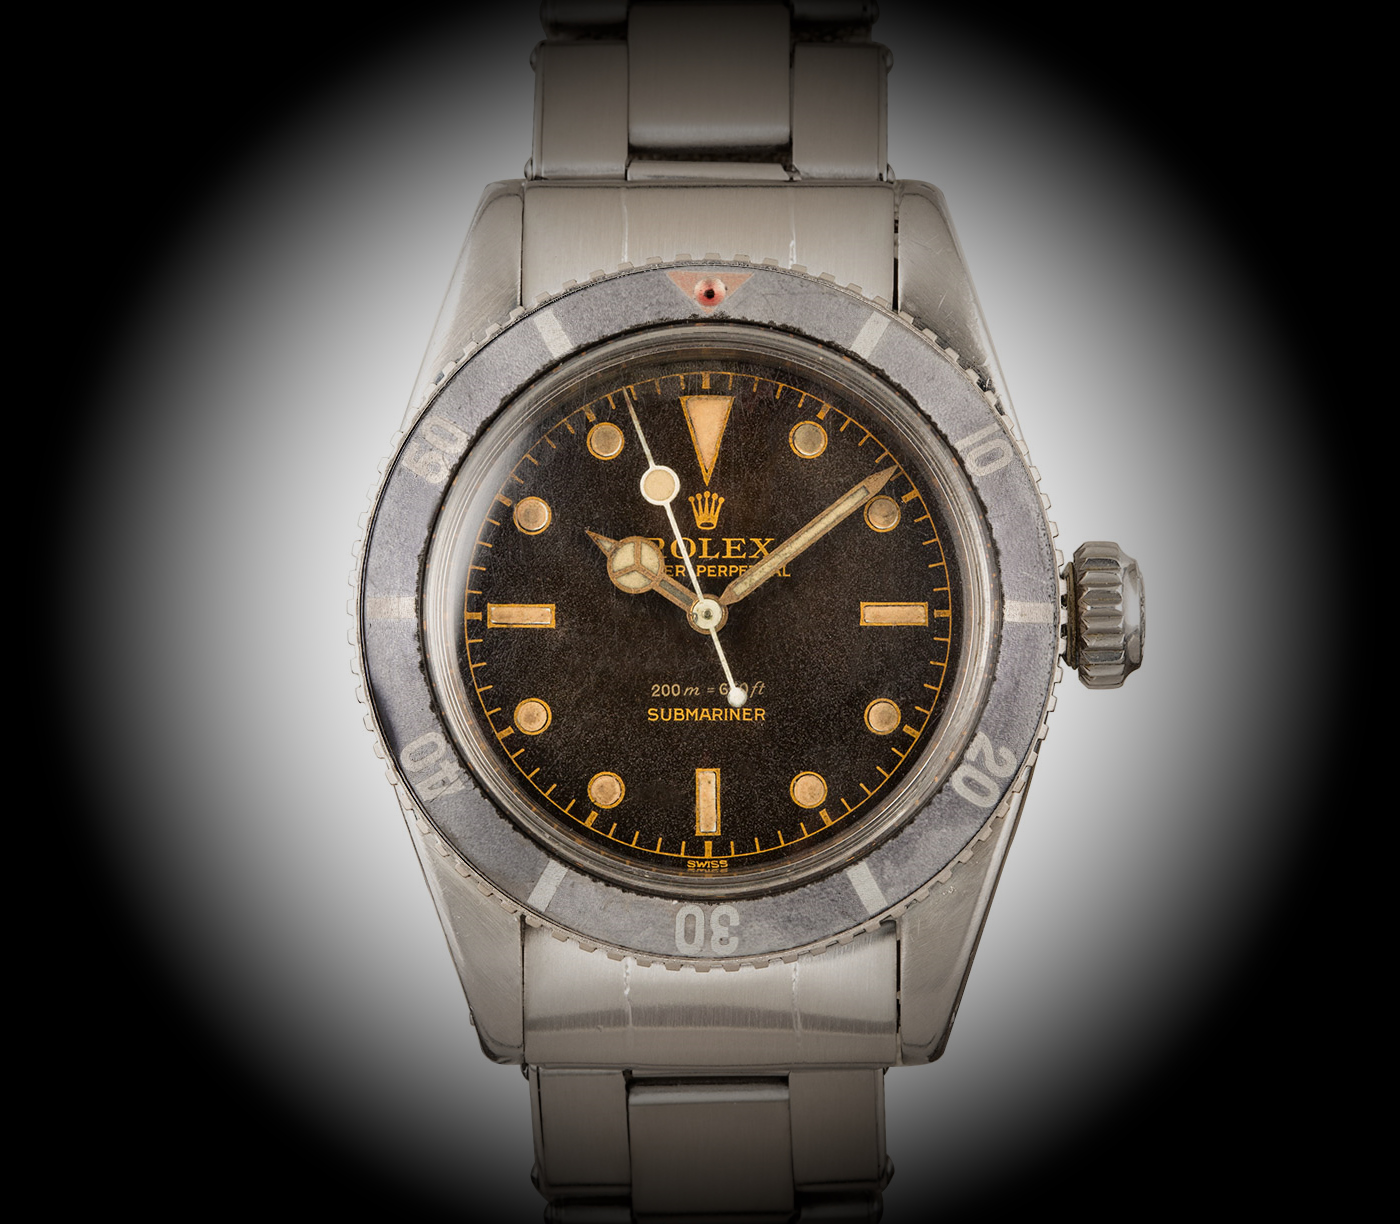 Iconic_watches_of_hollywood_Rolex_submariner_ref._6538_-_europa_star_watch_magazine_2020